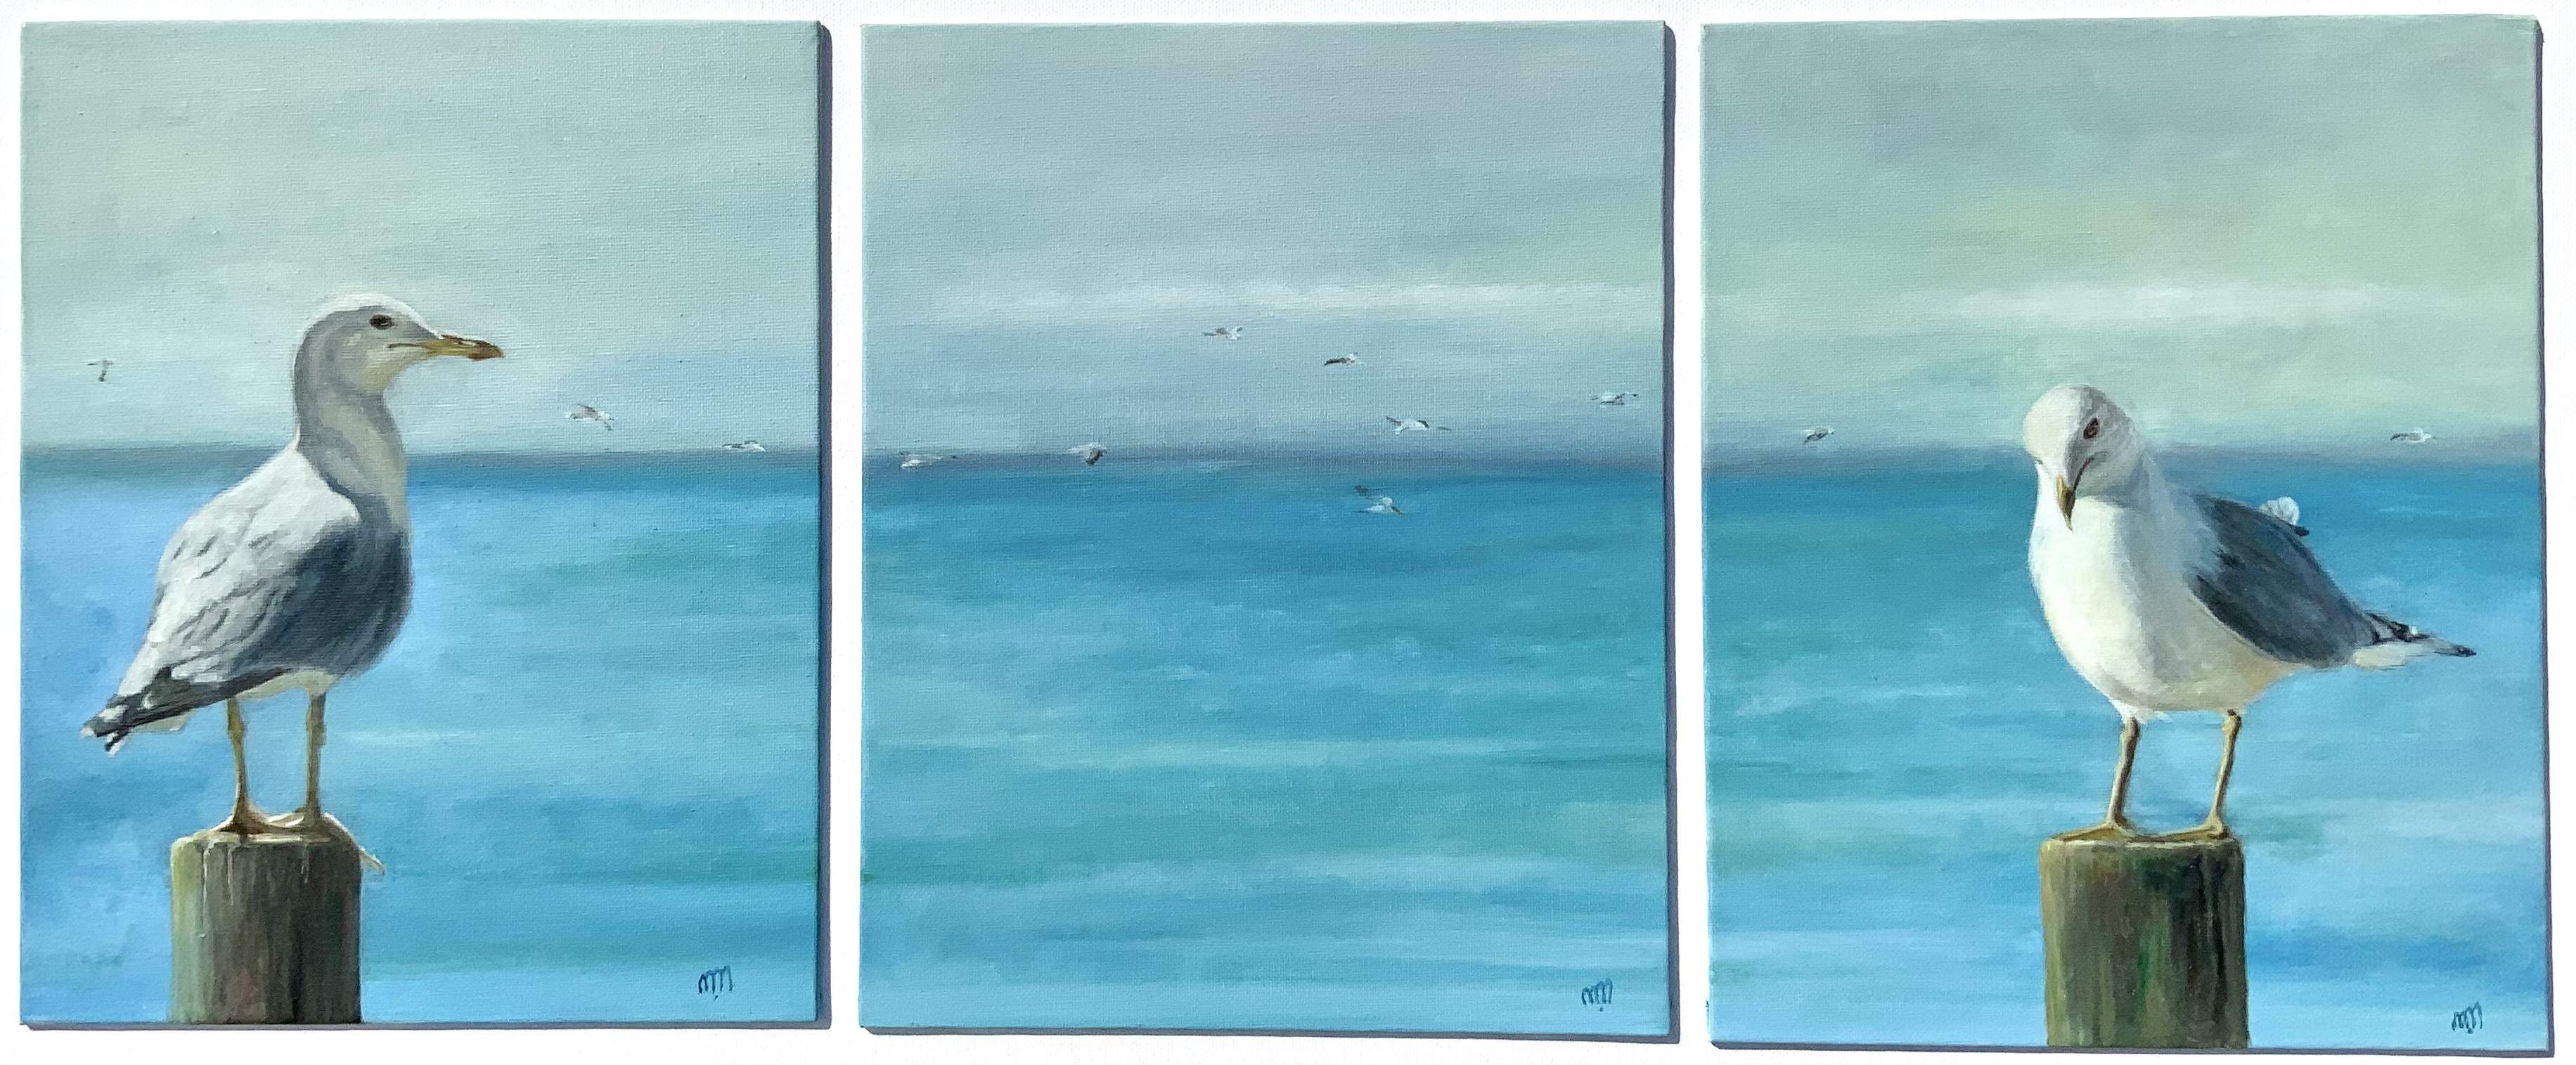 Triptych - Oil On Canvas Boards (Unframed)  3 x (9.5 x 12 inches) - €750 (Prints (3) €125.00)